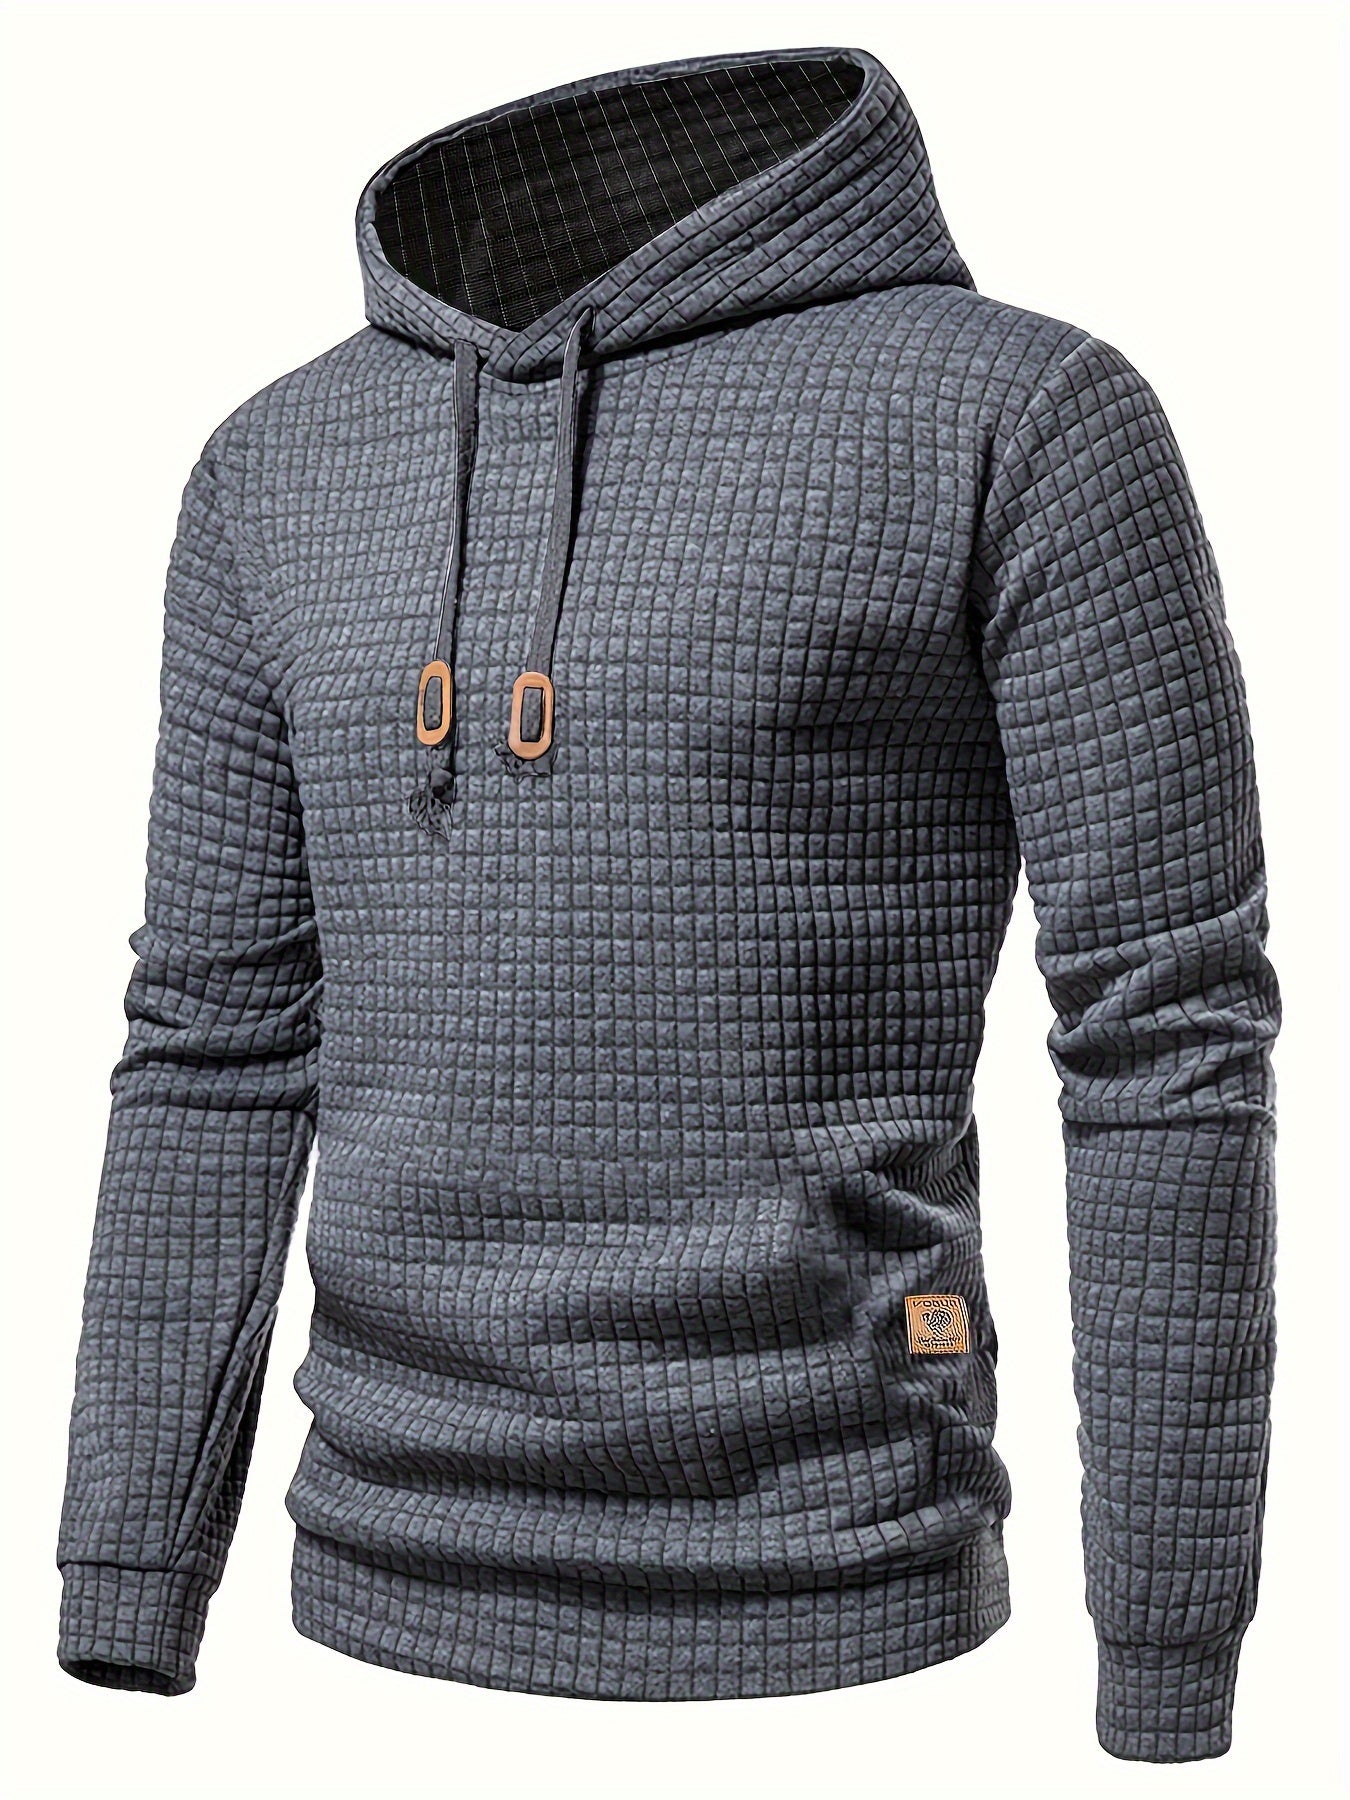 Waffle Pattern Solid Hoodie, Cool Hoodies For Men, Men's Casual Pullover Hooded Sweatshirt Streetwear For Spring Fall, As Gifts